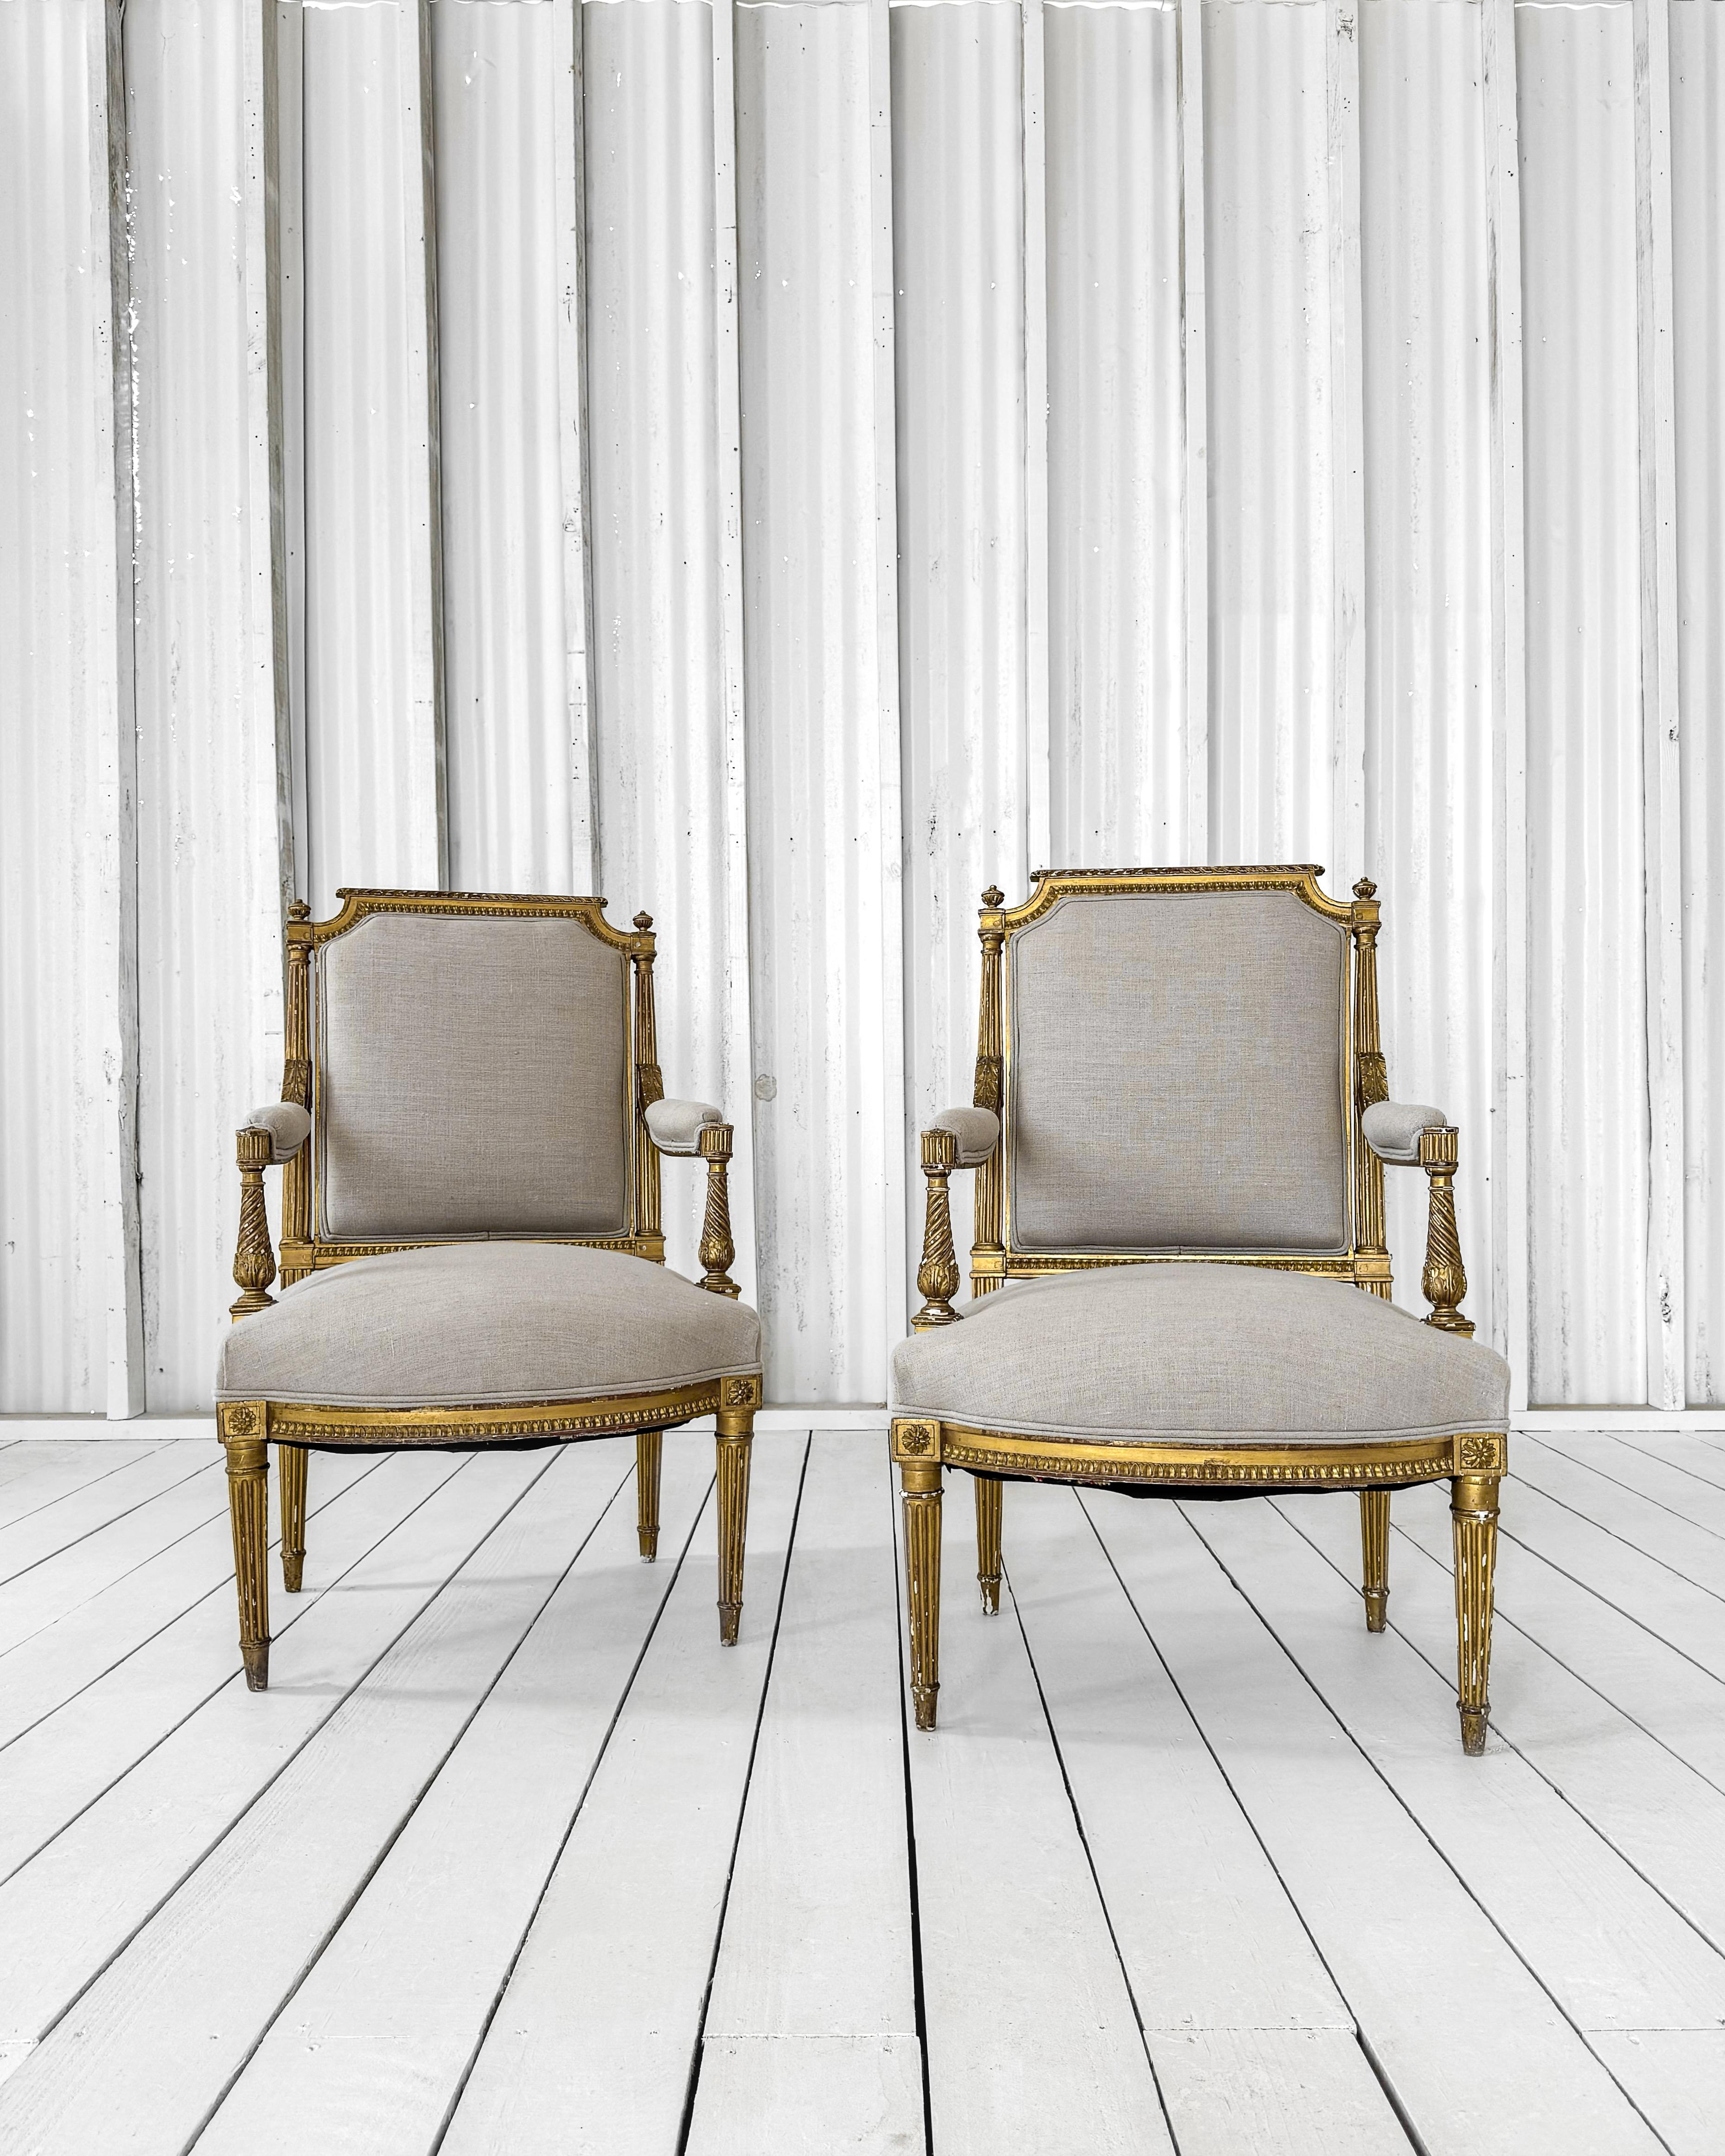 Beautiful antique Louis XVI fauteuil armchairs featuring a hand-molded frame and square-shaped back. Crafted from solid wood using mortise and tenon construction, the fluted outer back of the chair’s frame is adorned with ornate detailing along the